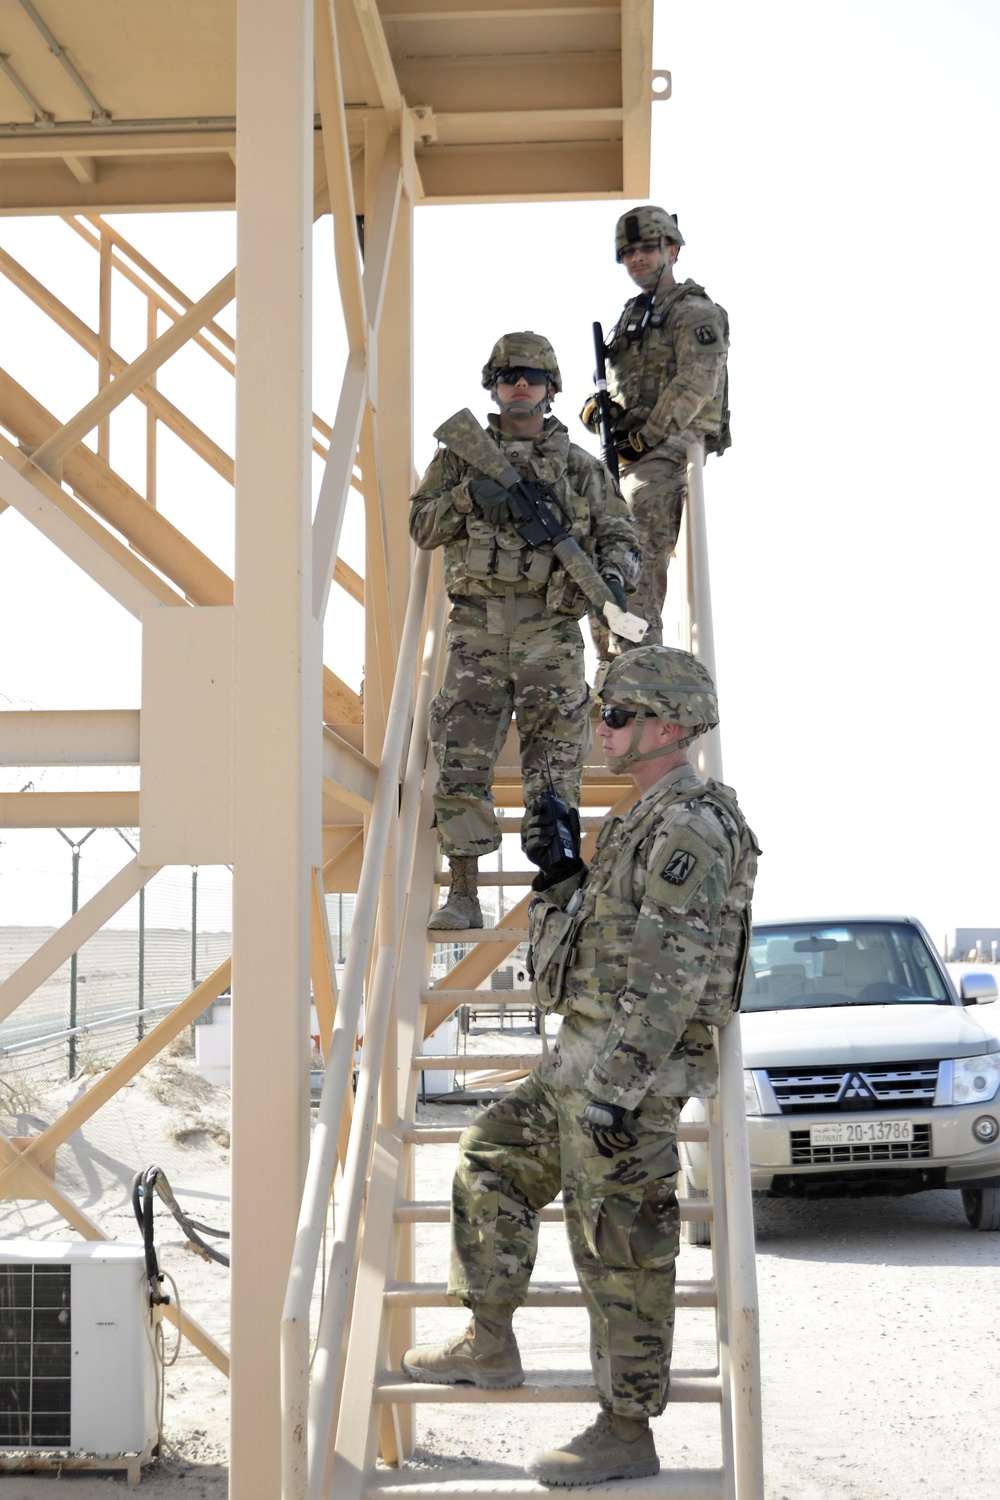 335th Soldiers Conduct Tower Duty